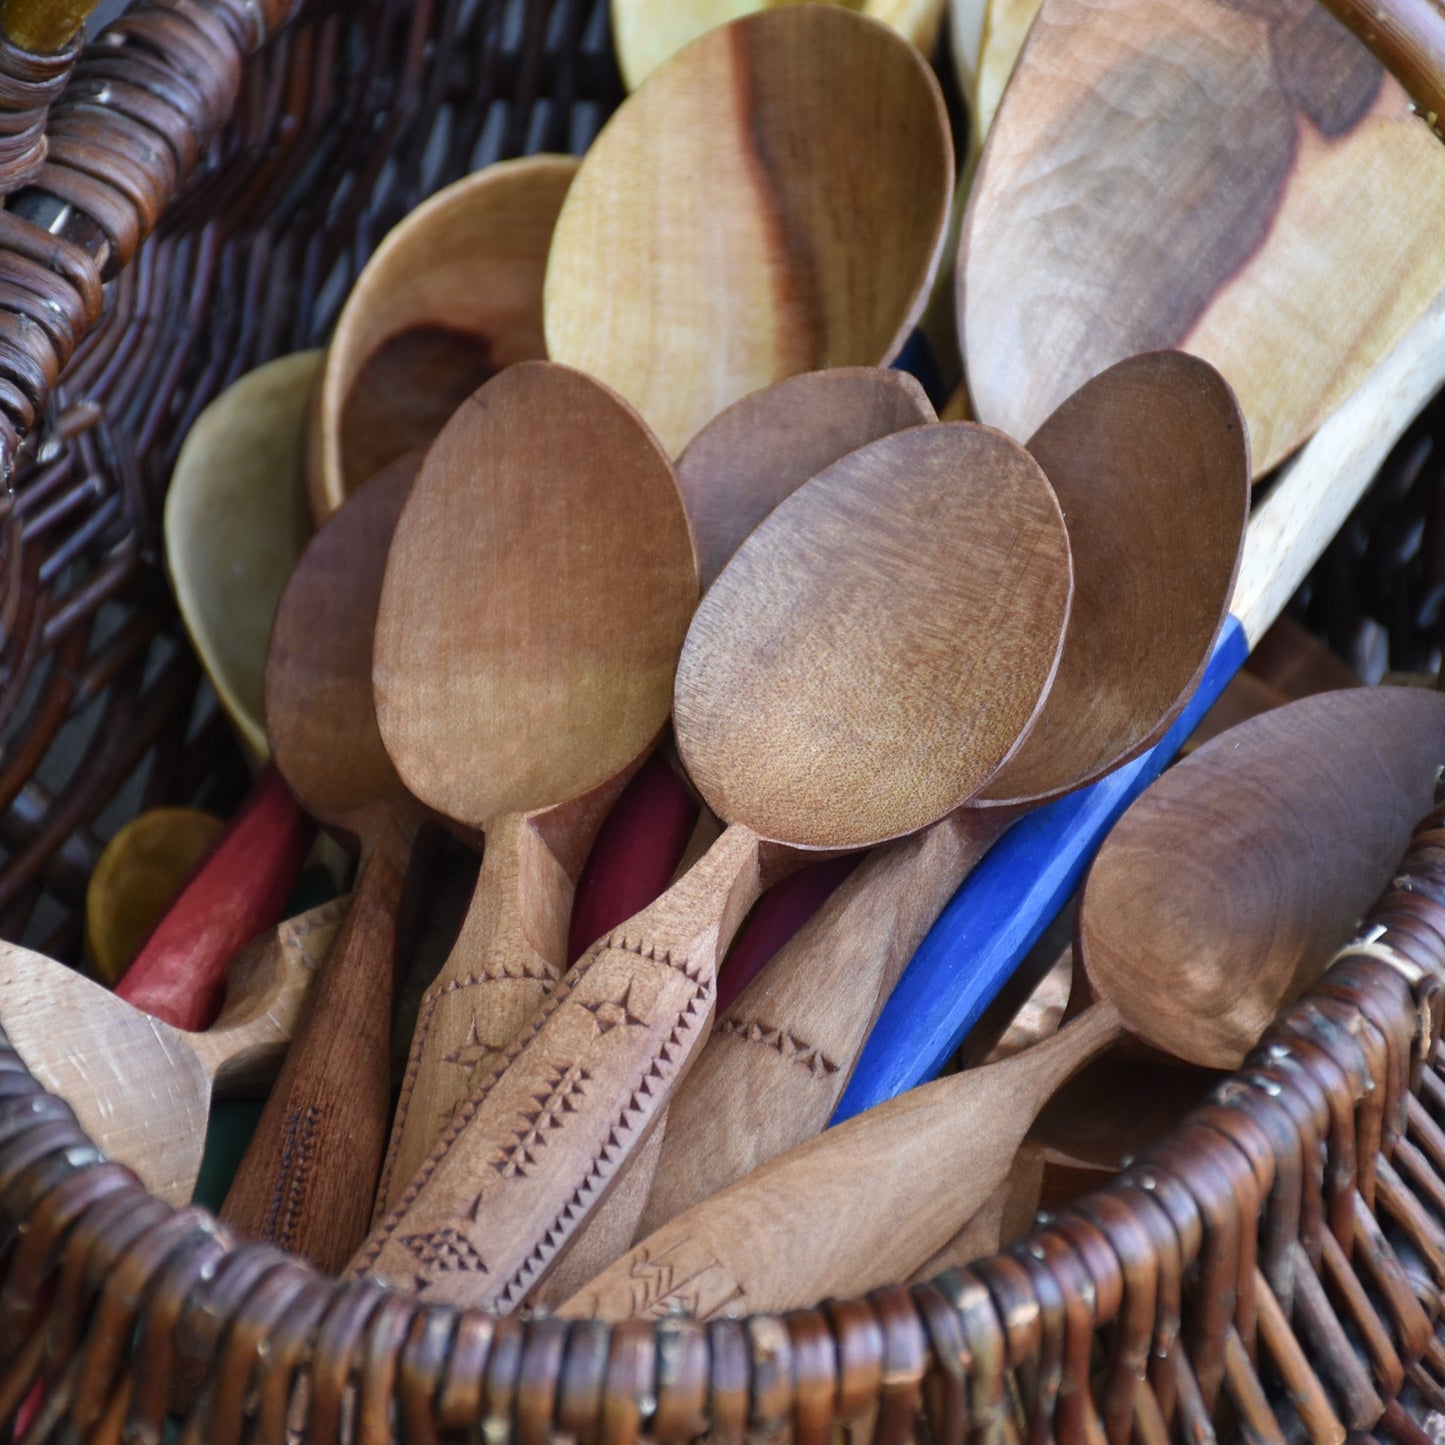 Introduction to Spoon Carving (Level 1) Workshop - 12.05.24 (AM)